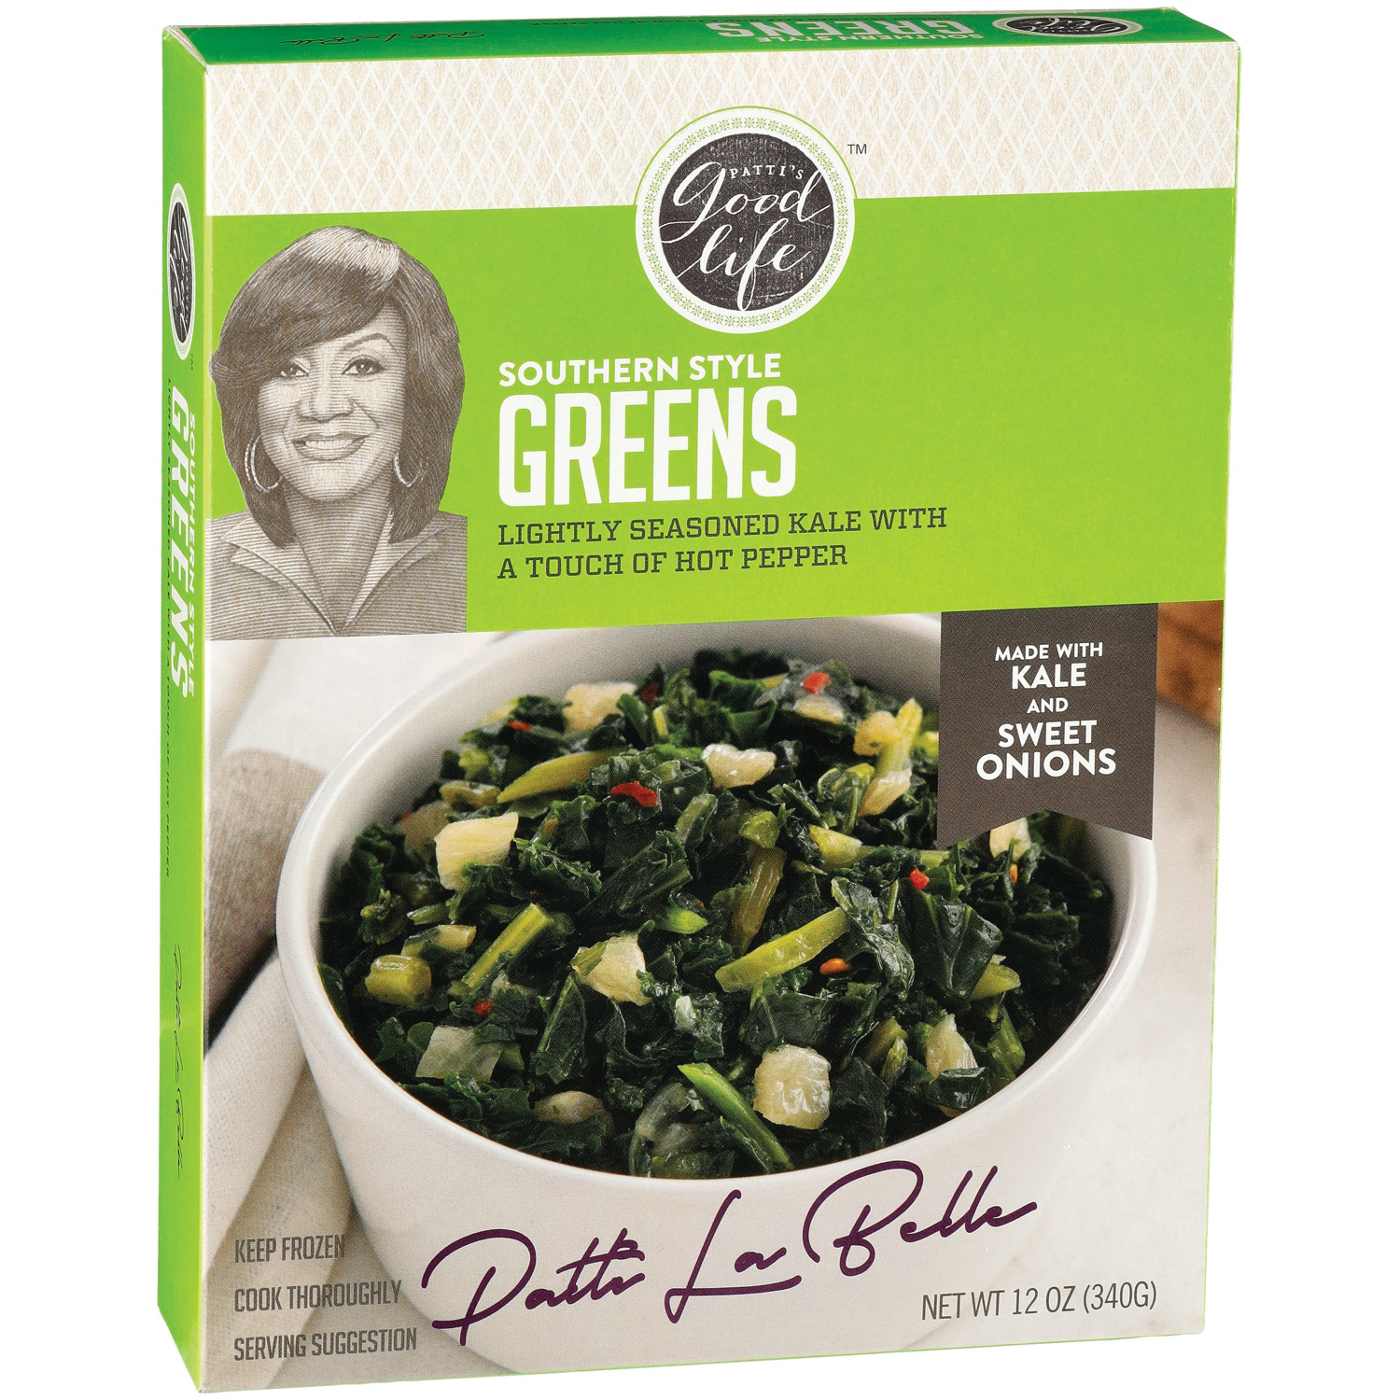 Patti's Good Life Southern Style Greens; image 1 of 4